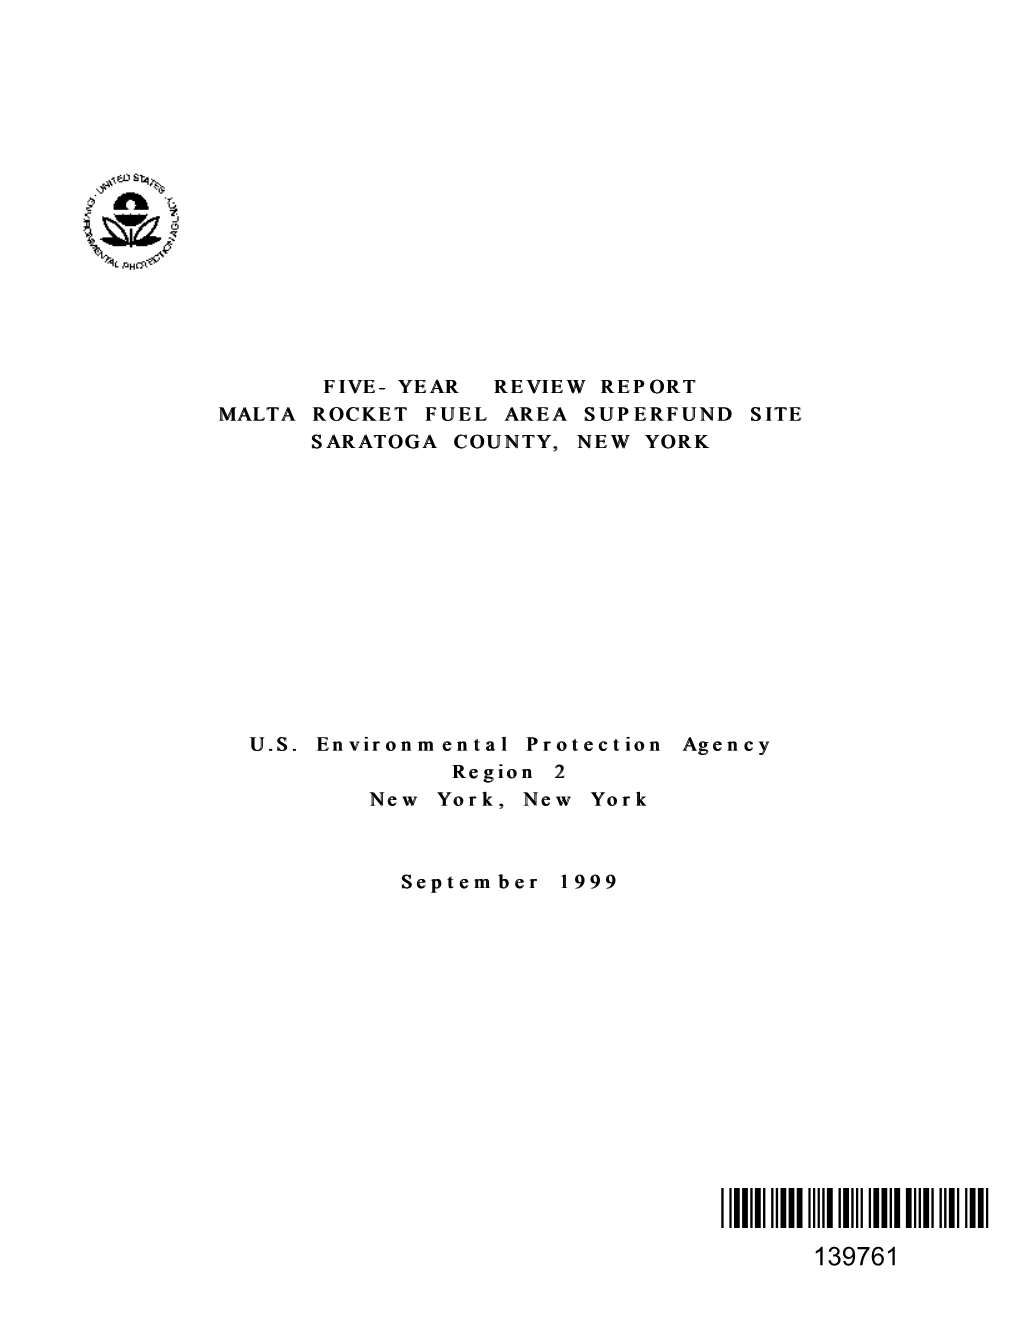 Five-Year Review Report, Malta Rocket Fuel Area Superfund Site, Saratoga County, New York